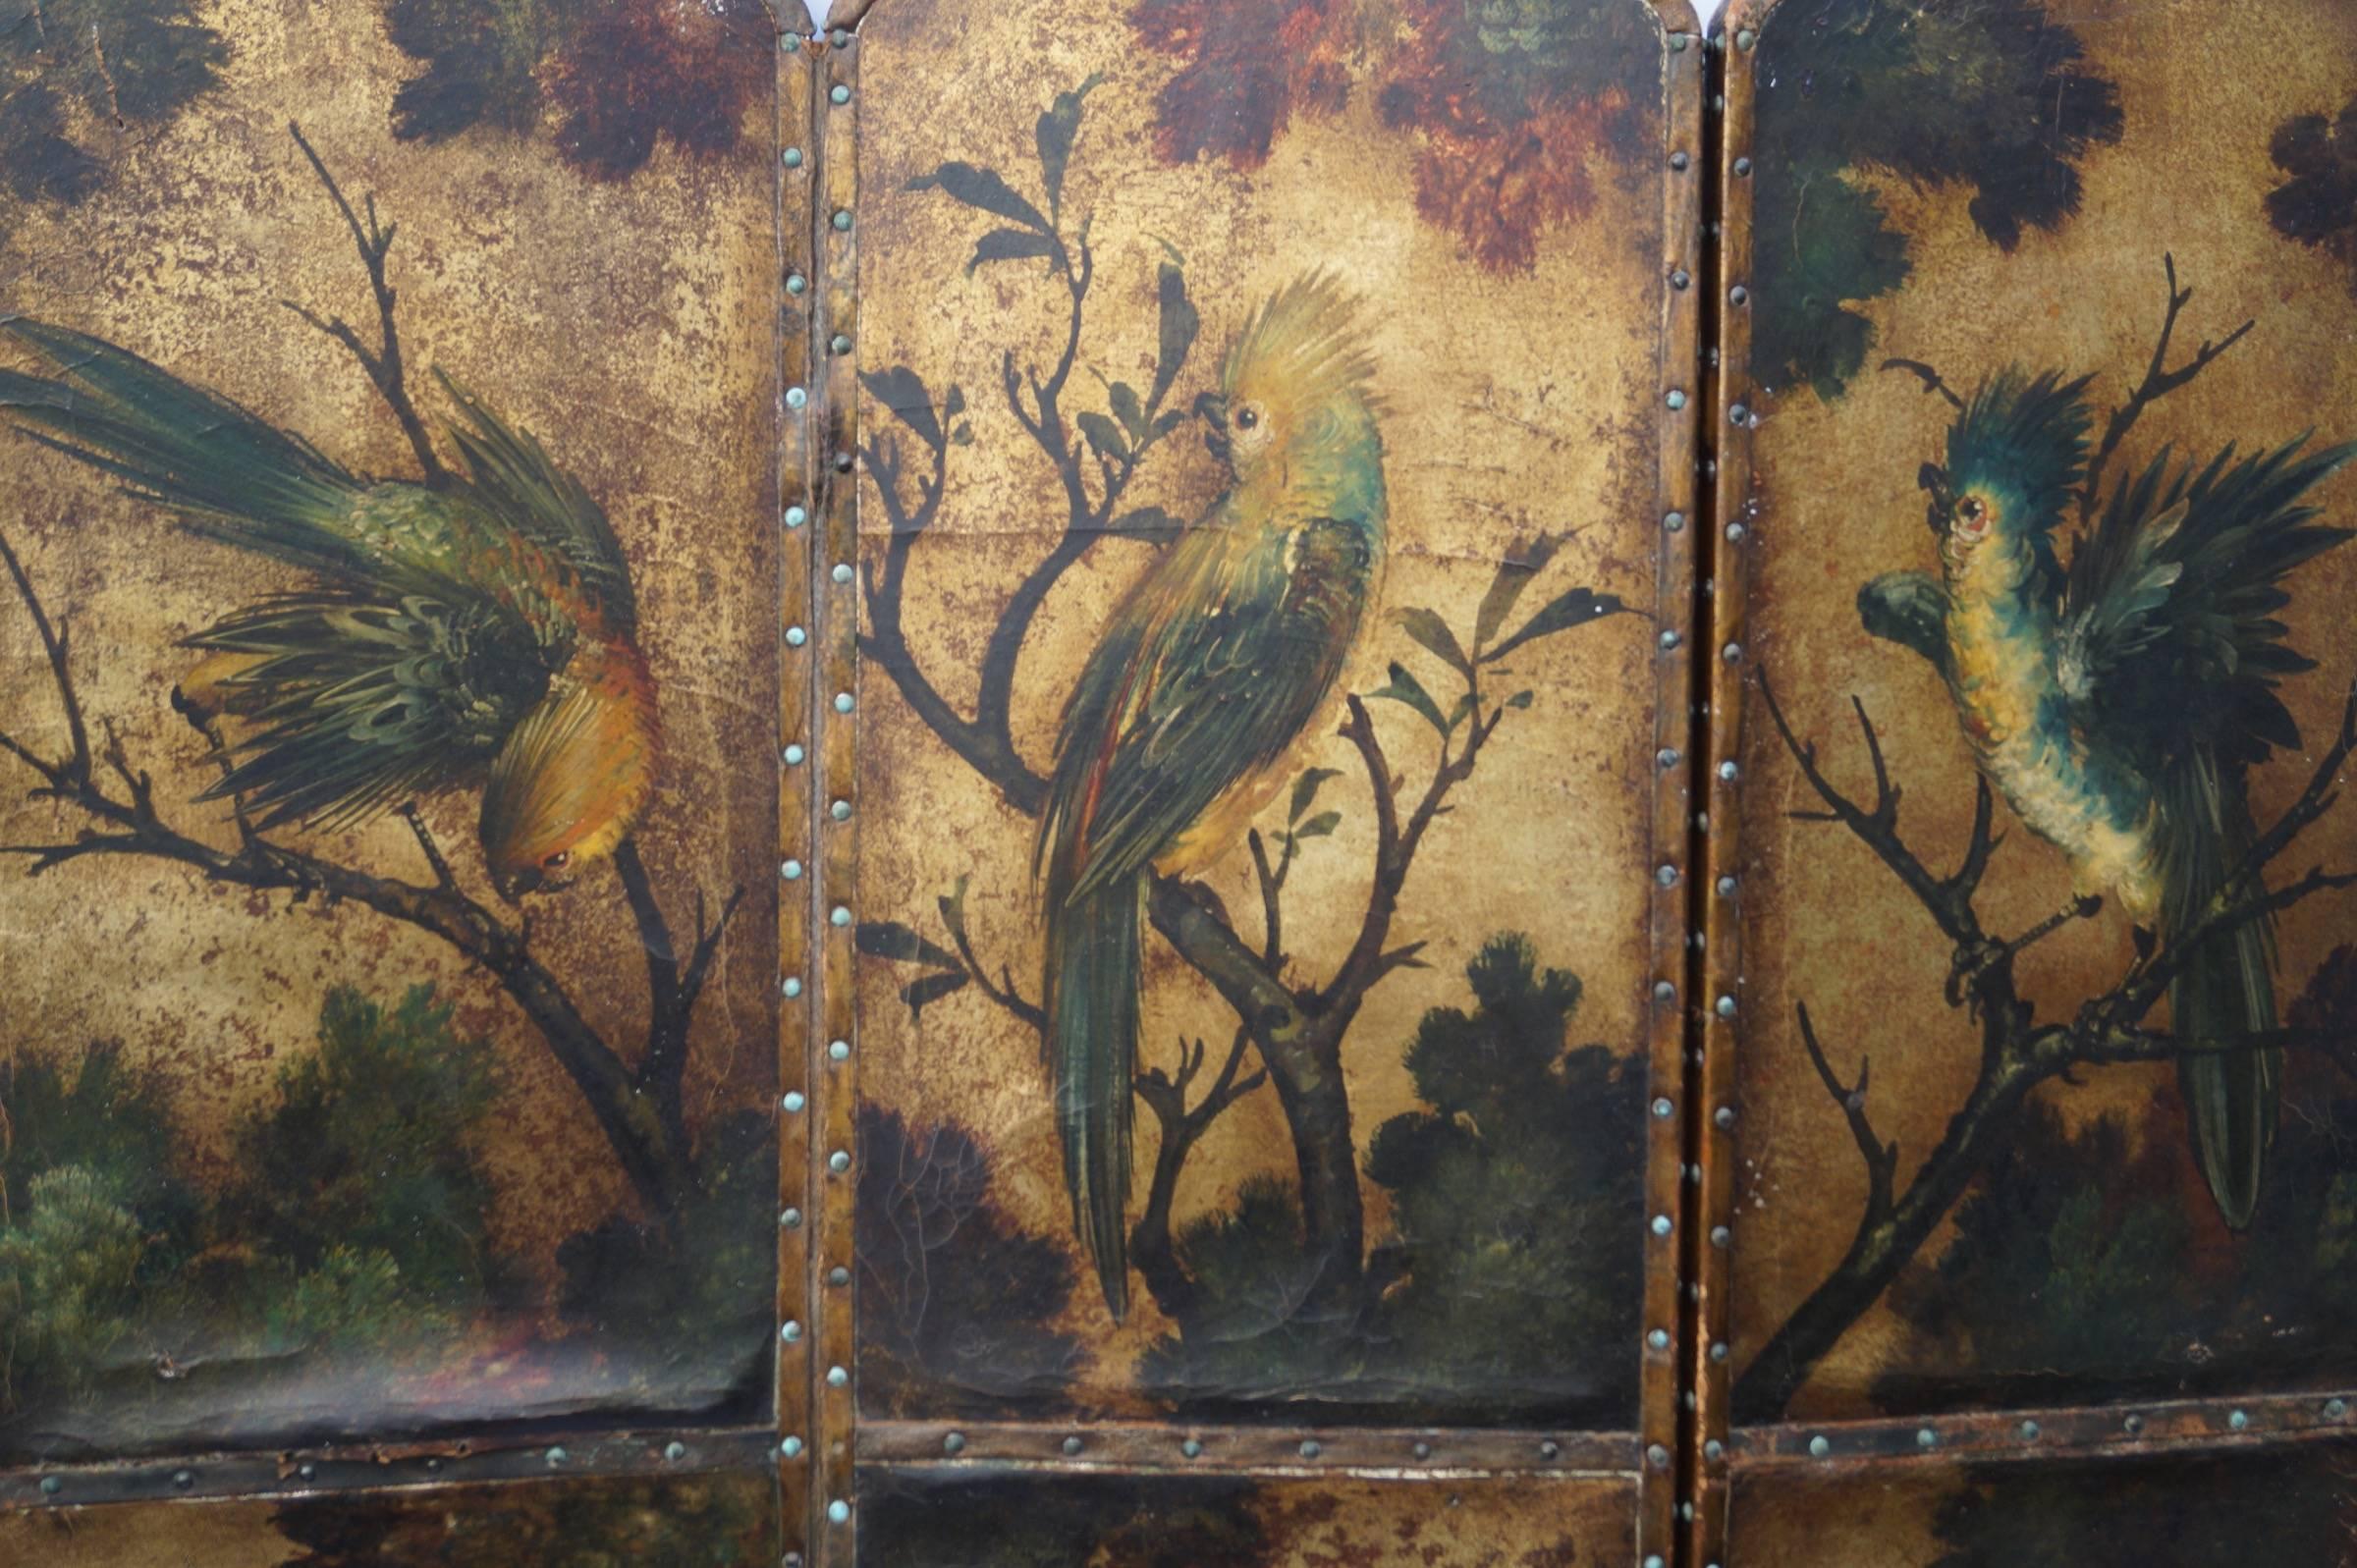 Leather screen with birds and floral decoration. 
England early 19th century three panel screen.
Hand-painted on leather. 
Wear in accordance with age. Minor damage.

Measures: H 176cm x W 137cm.